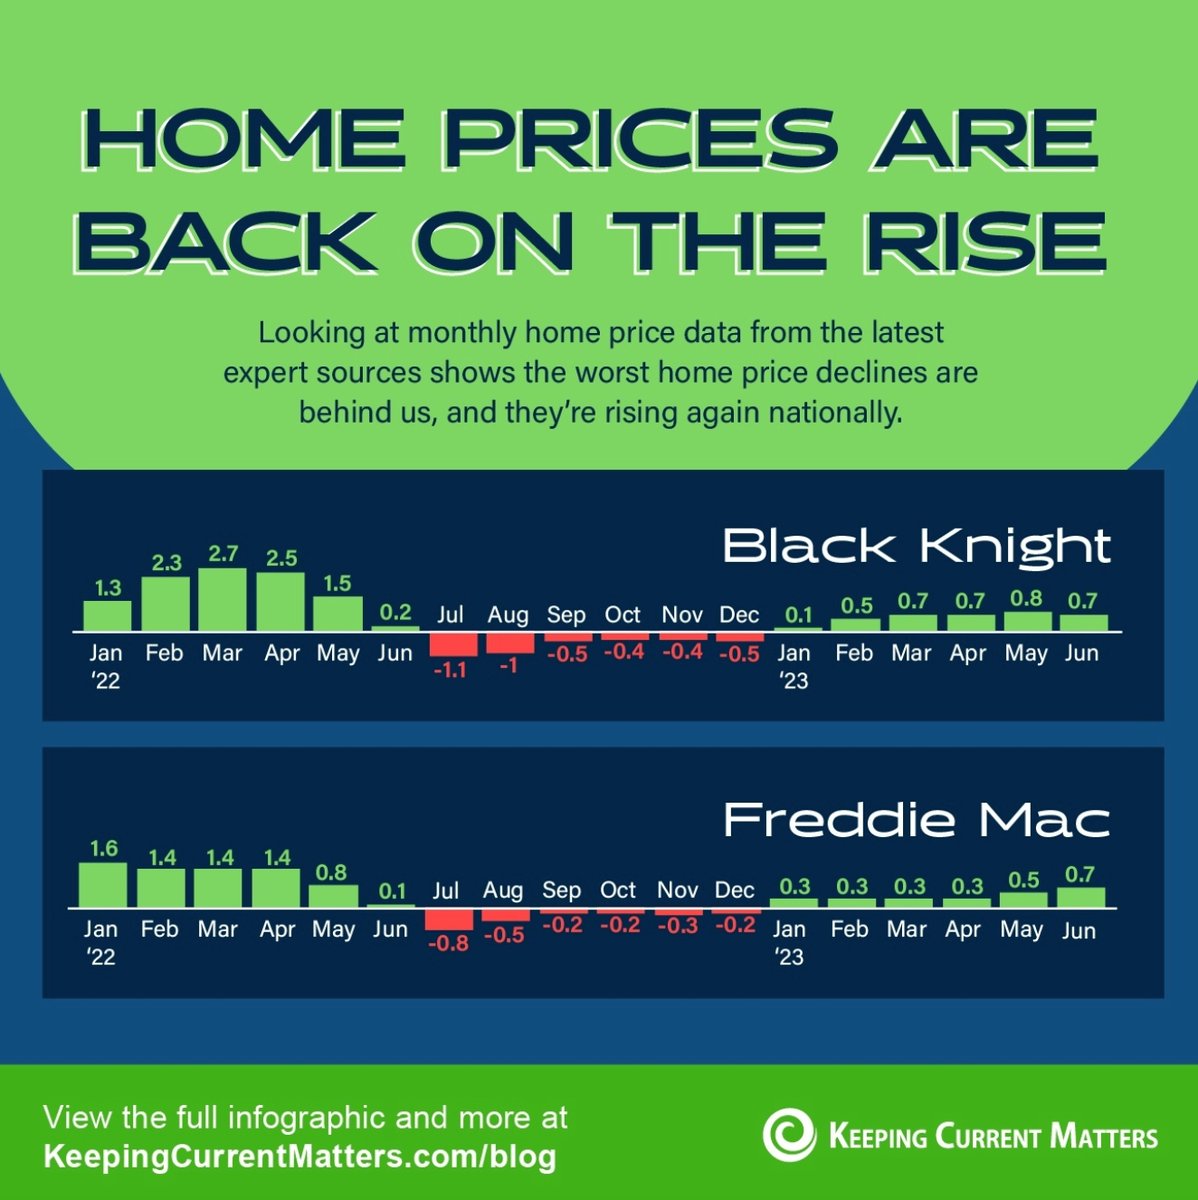 Confused by home price headlines? This infographic simplifies the trend, showcasing home price increases from six sources. If your clients are uncertain about prices or think they're dropping, this visual proves prices are on the rise in 2023. #HomePriceTrends #RealEstateInsights